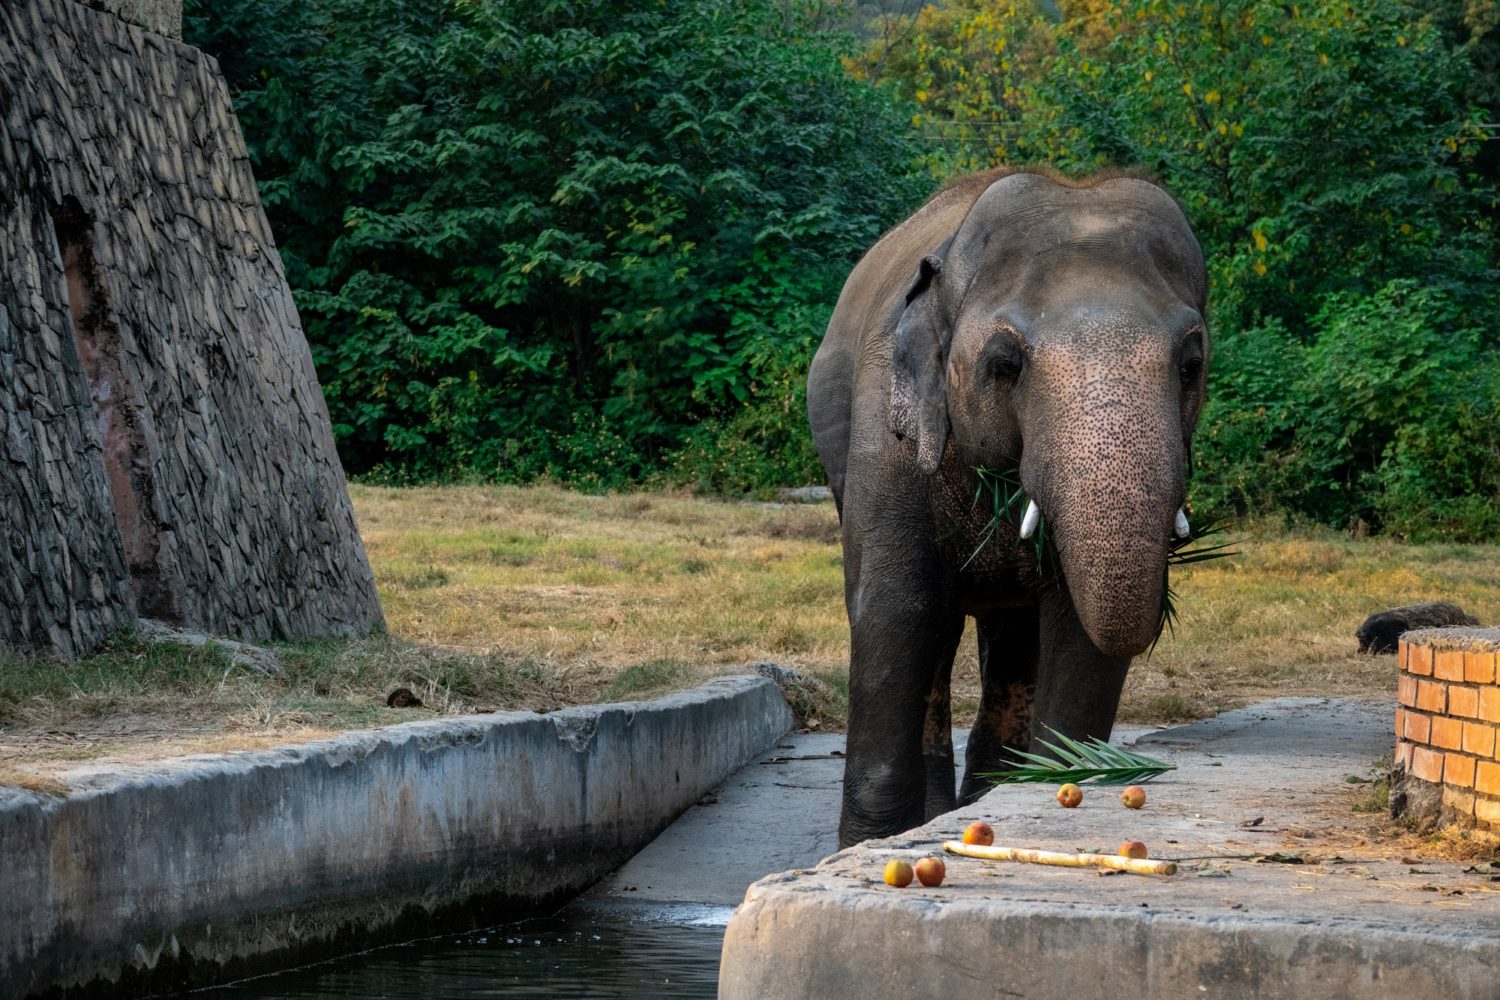 How Cher Helped Free the 'World's Loneliest Elephant'